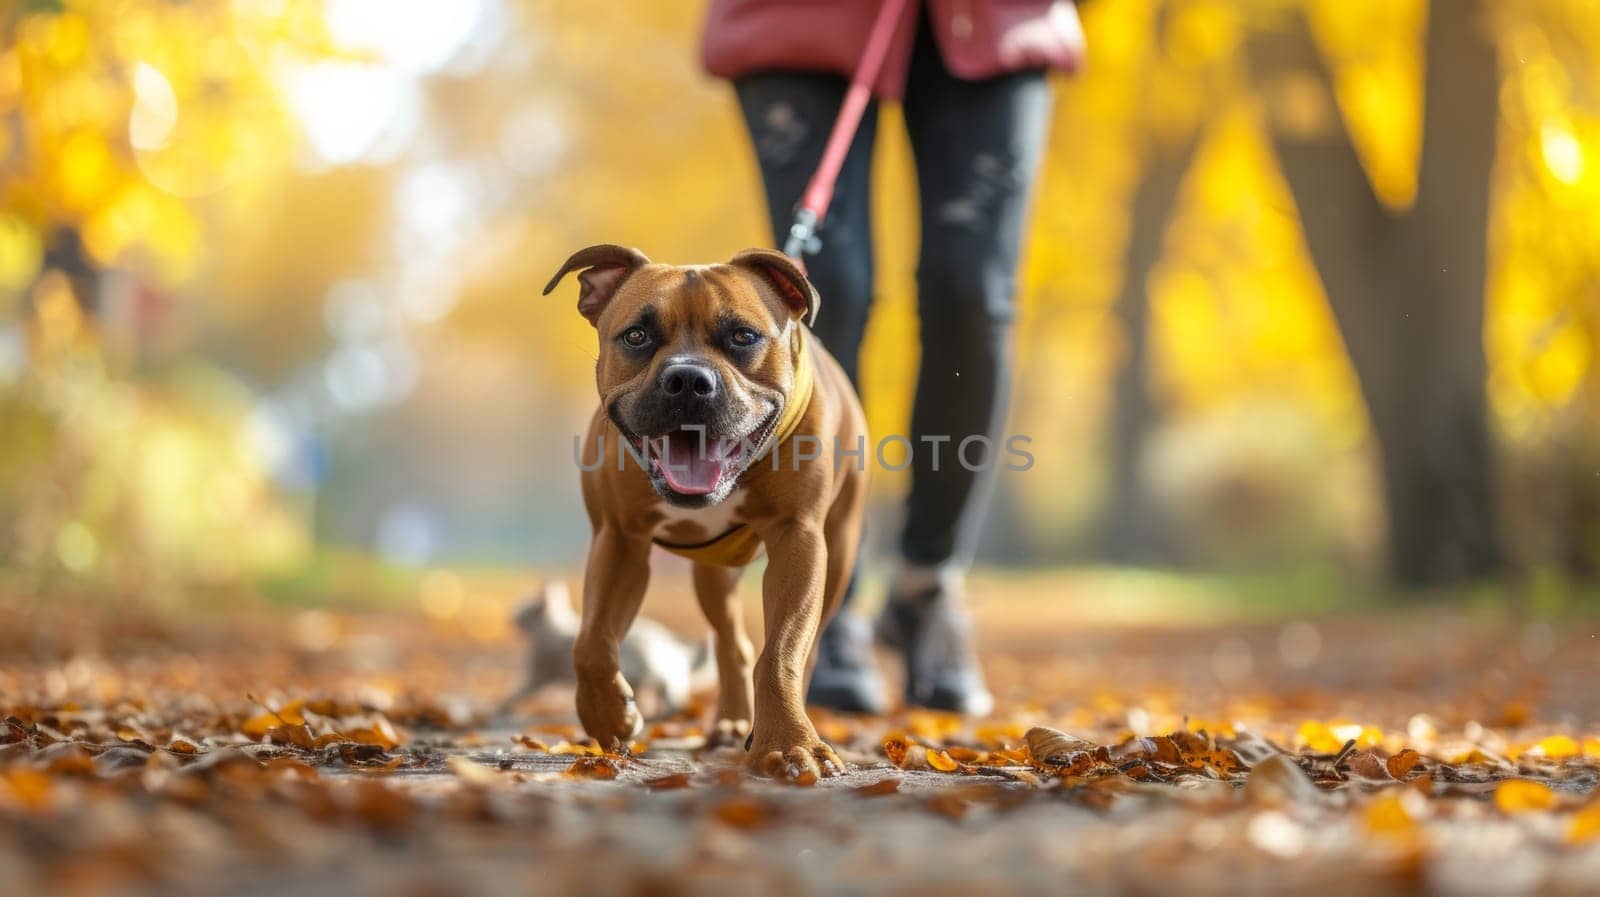 A dog walking on a leash in the fall leaves